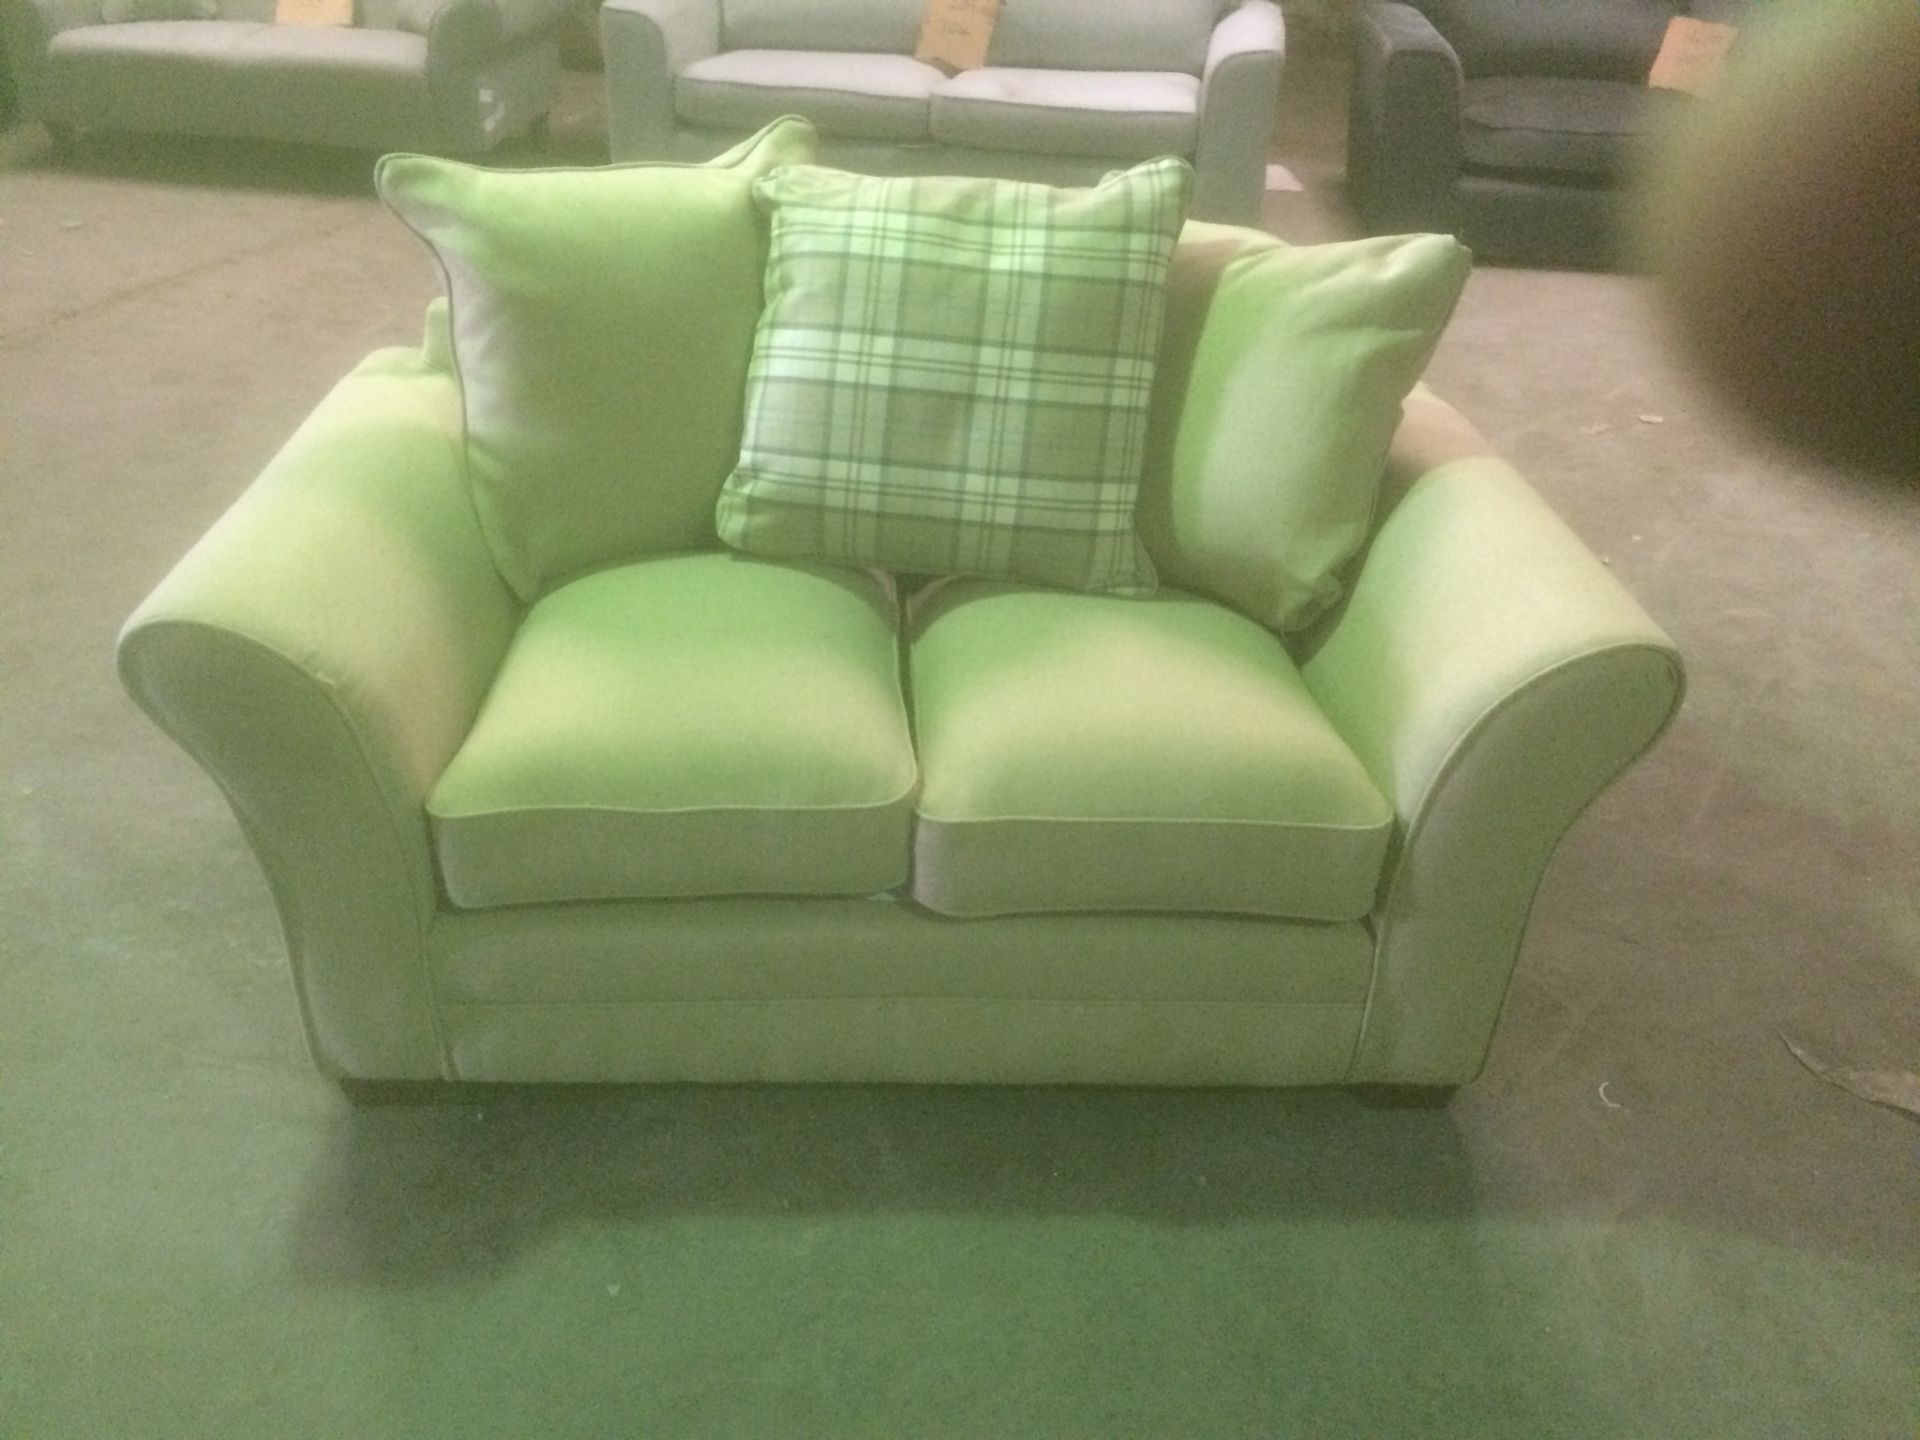 Byron 2 seater sofa in beige fabric with scatterback cushions and dark wooden feet - Image 2 of 2